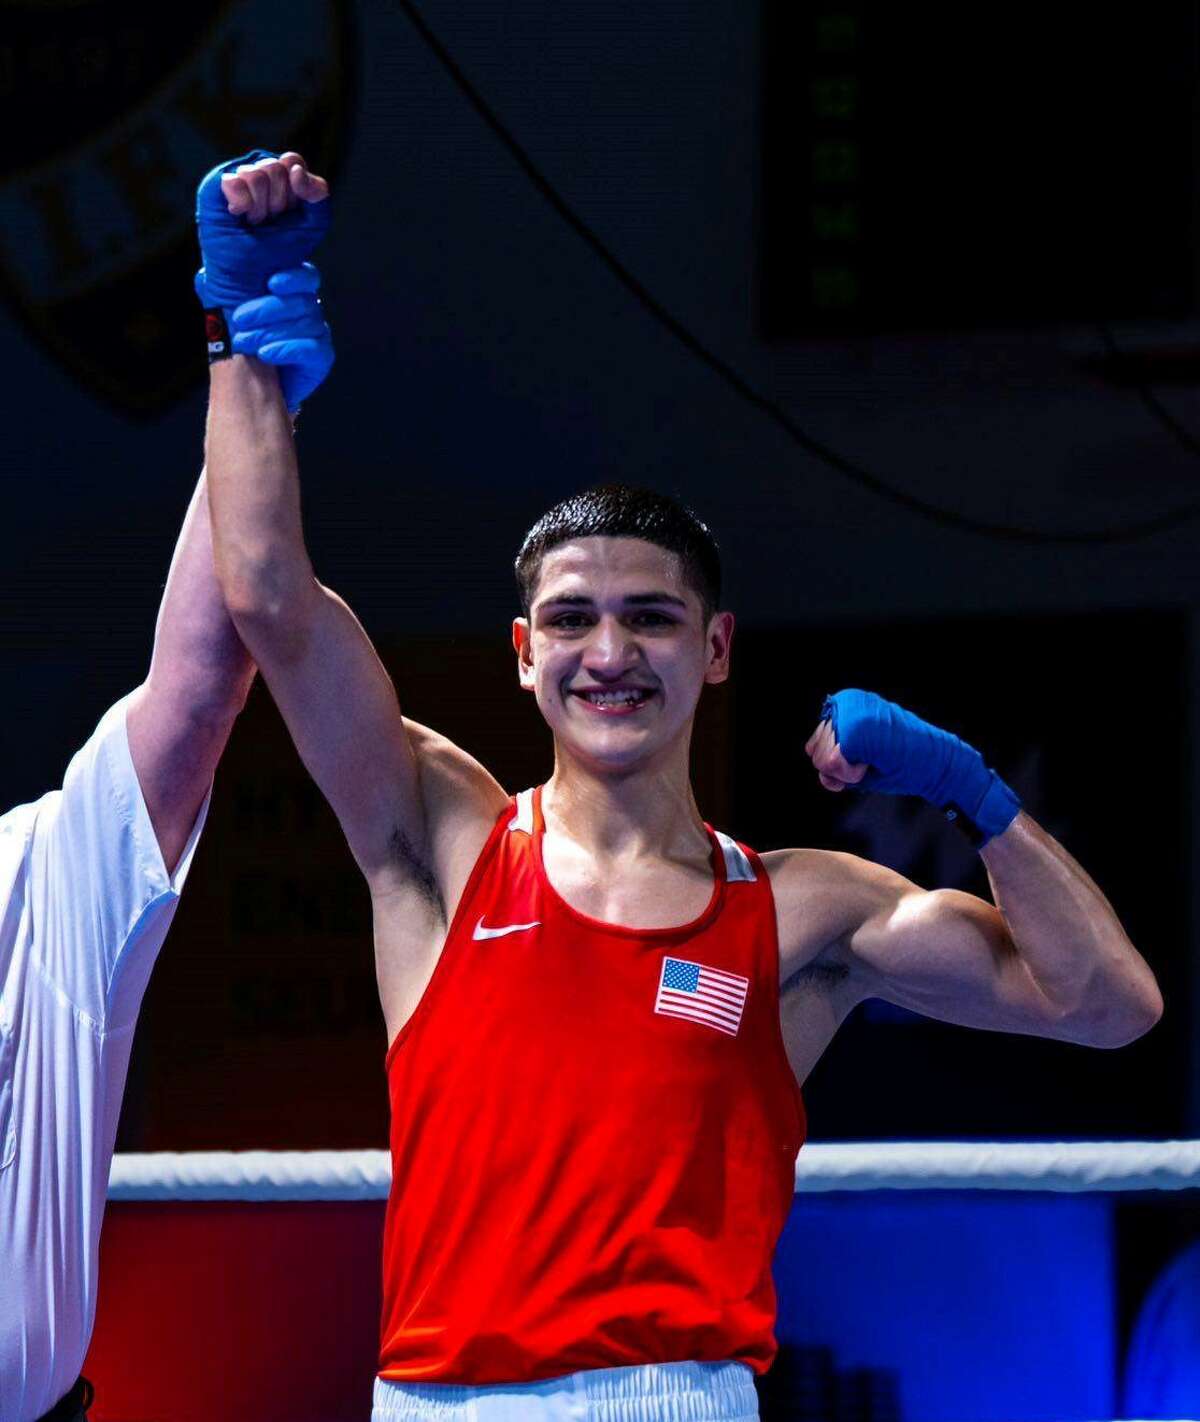 Emilio Garcia won by unanimous decision Saturday, April 15 against Canada's Wyatt Sandford to advance to the championship bout at the the 41st annual GeeBee Tournament in Helsinki, Finland for USA Boxing.